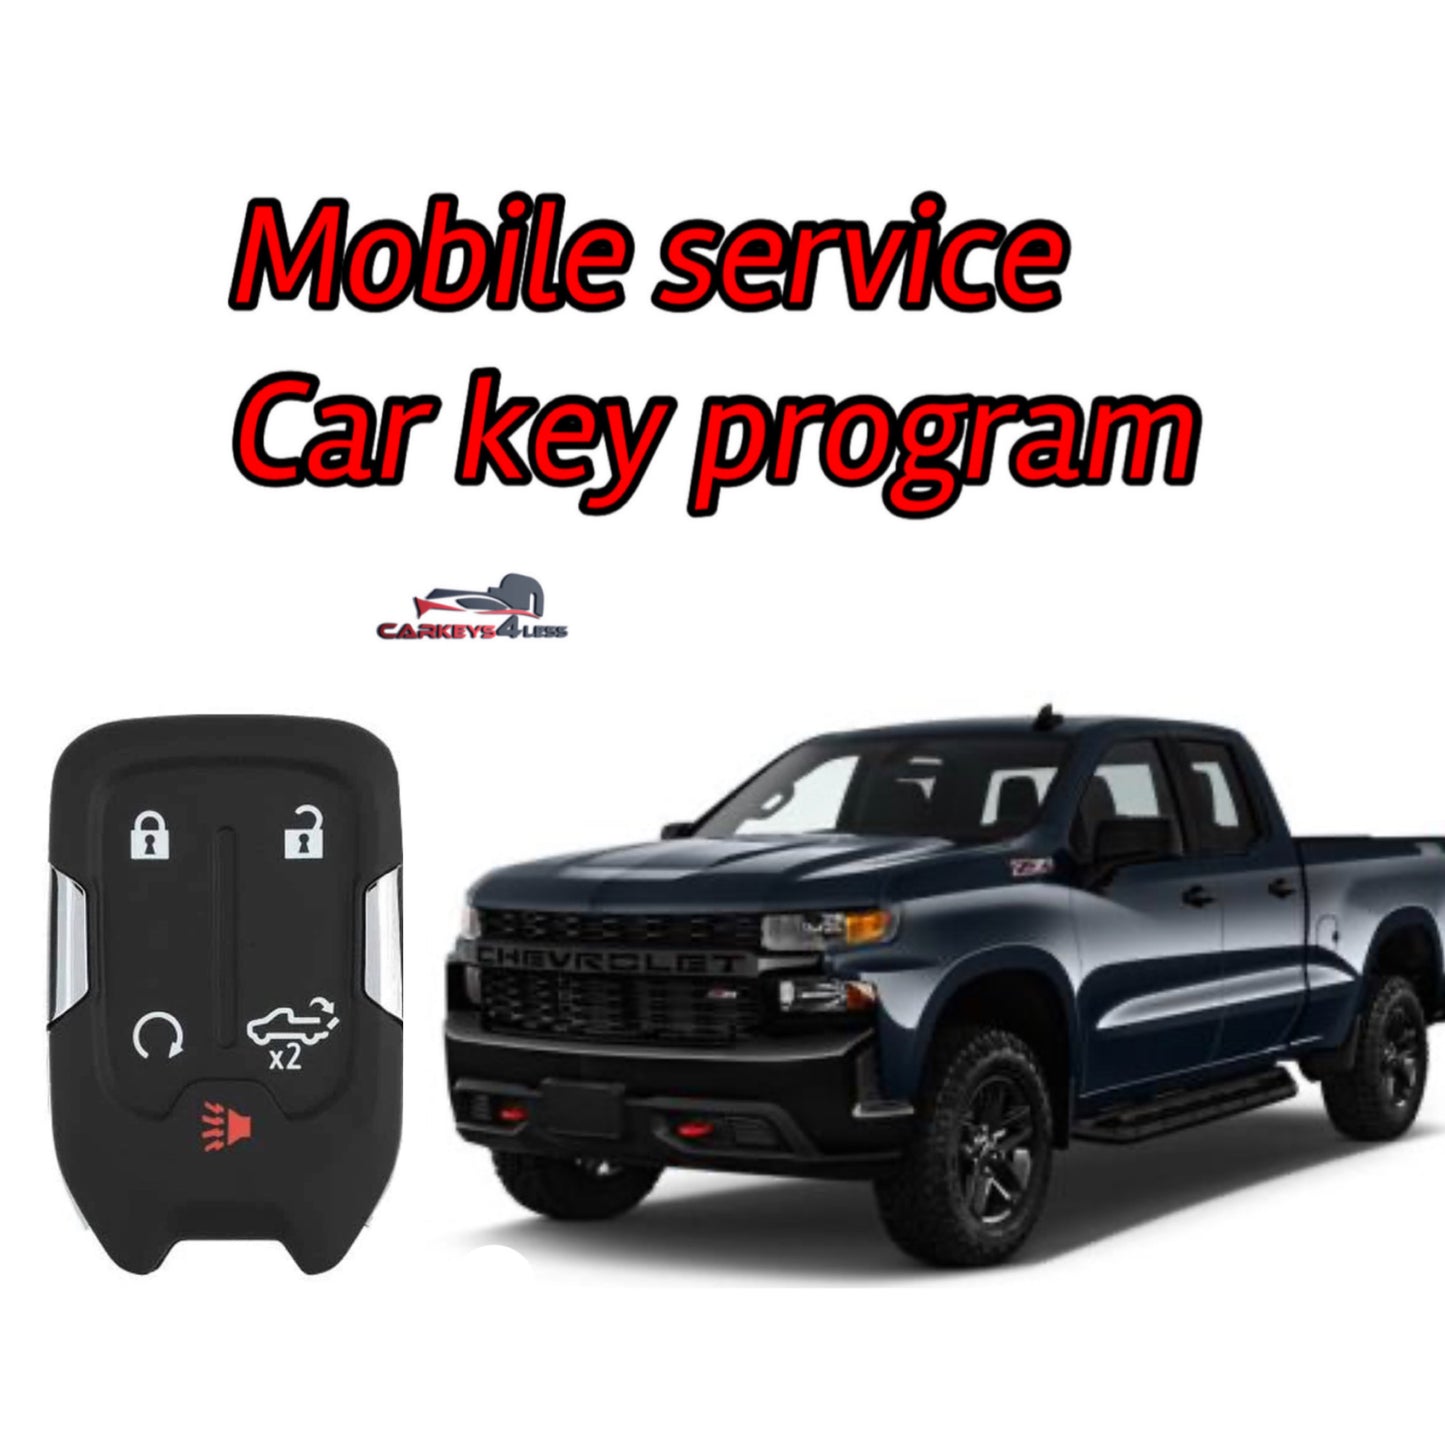 Mobile service for an aftermarket Chevrolet Silverado car key replacement